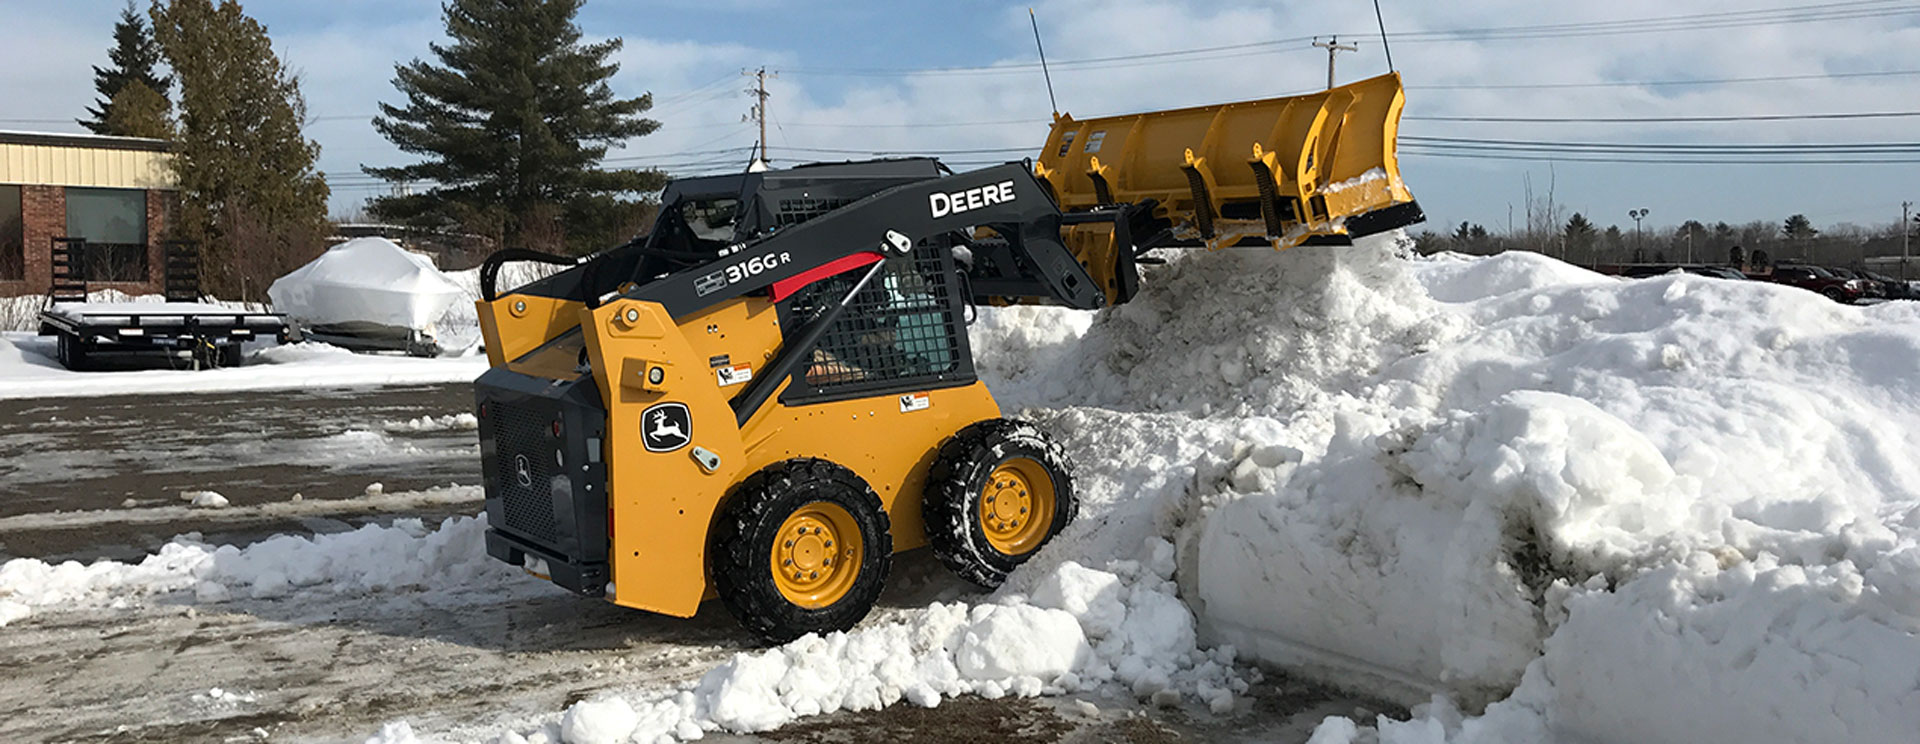 clearing snow in parking lot